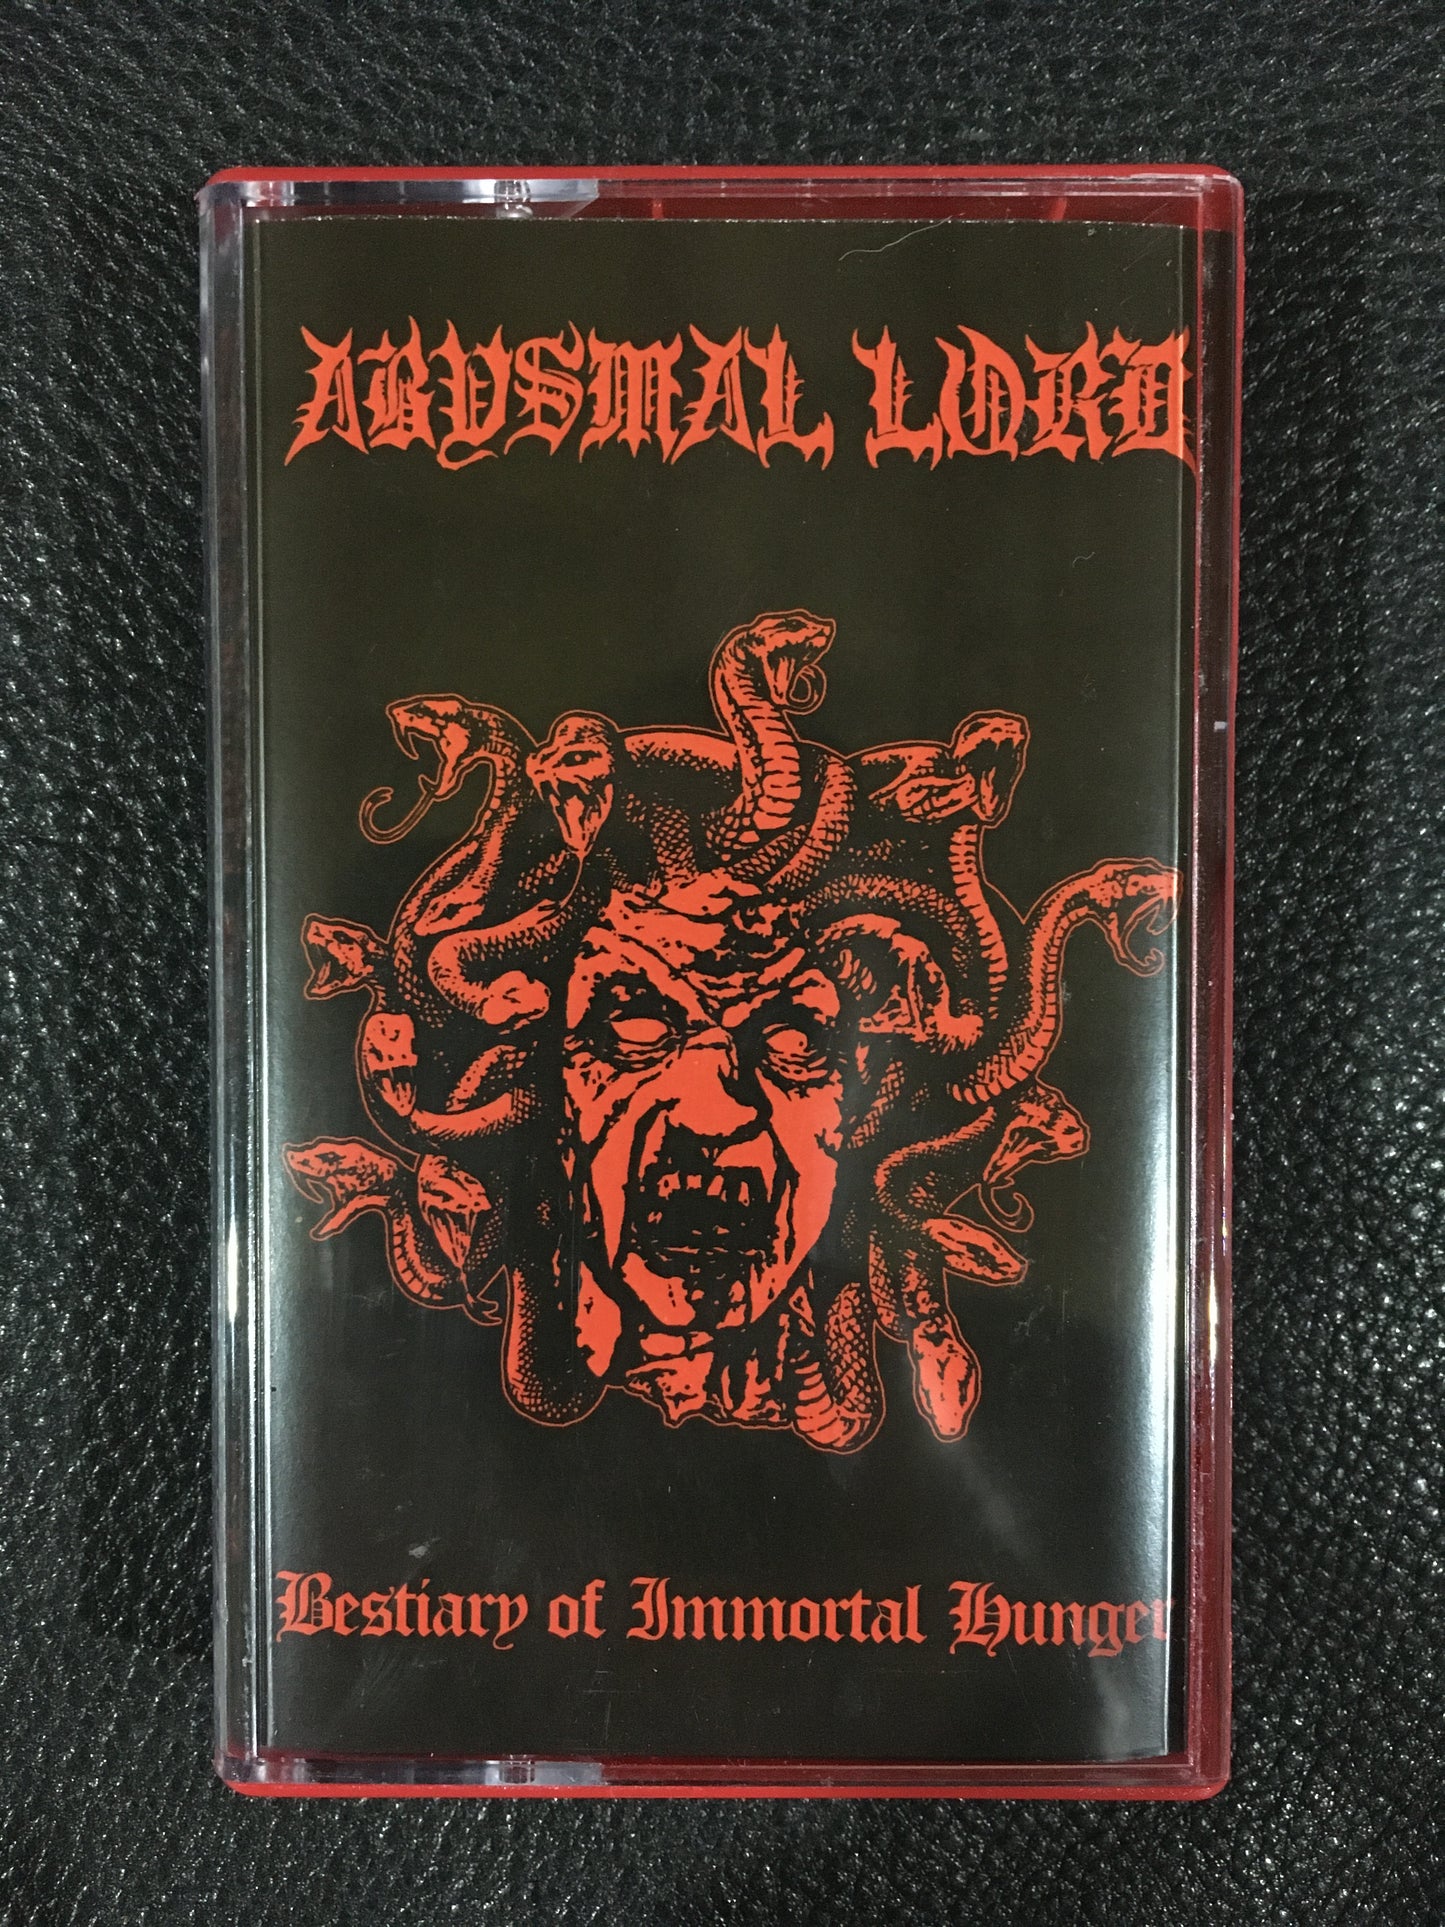 Abysmal Lord - Bestiary of Immortal Hunger